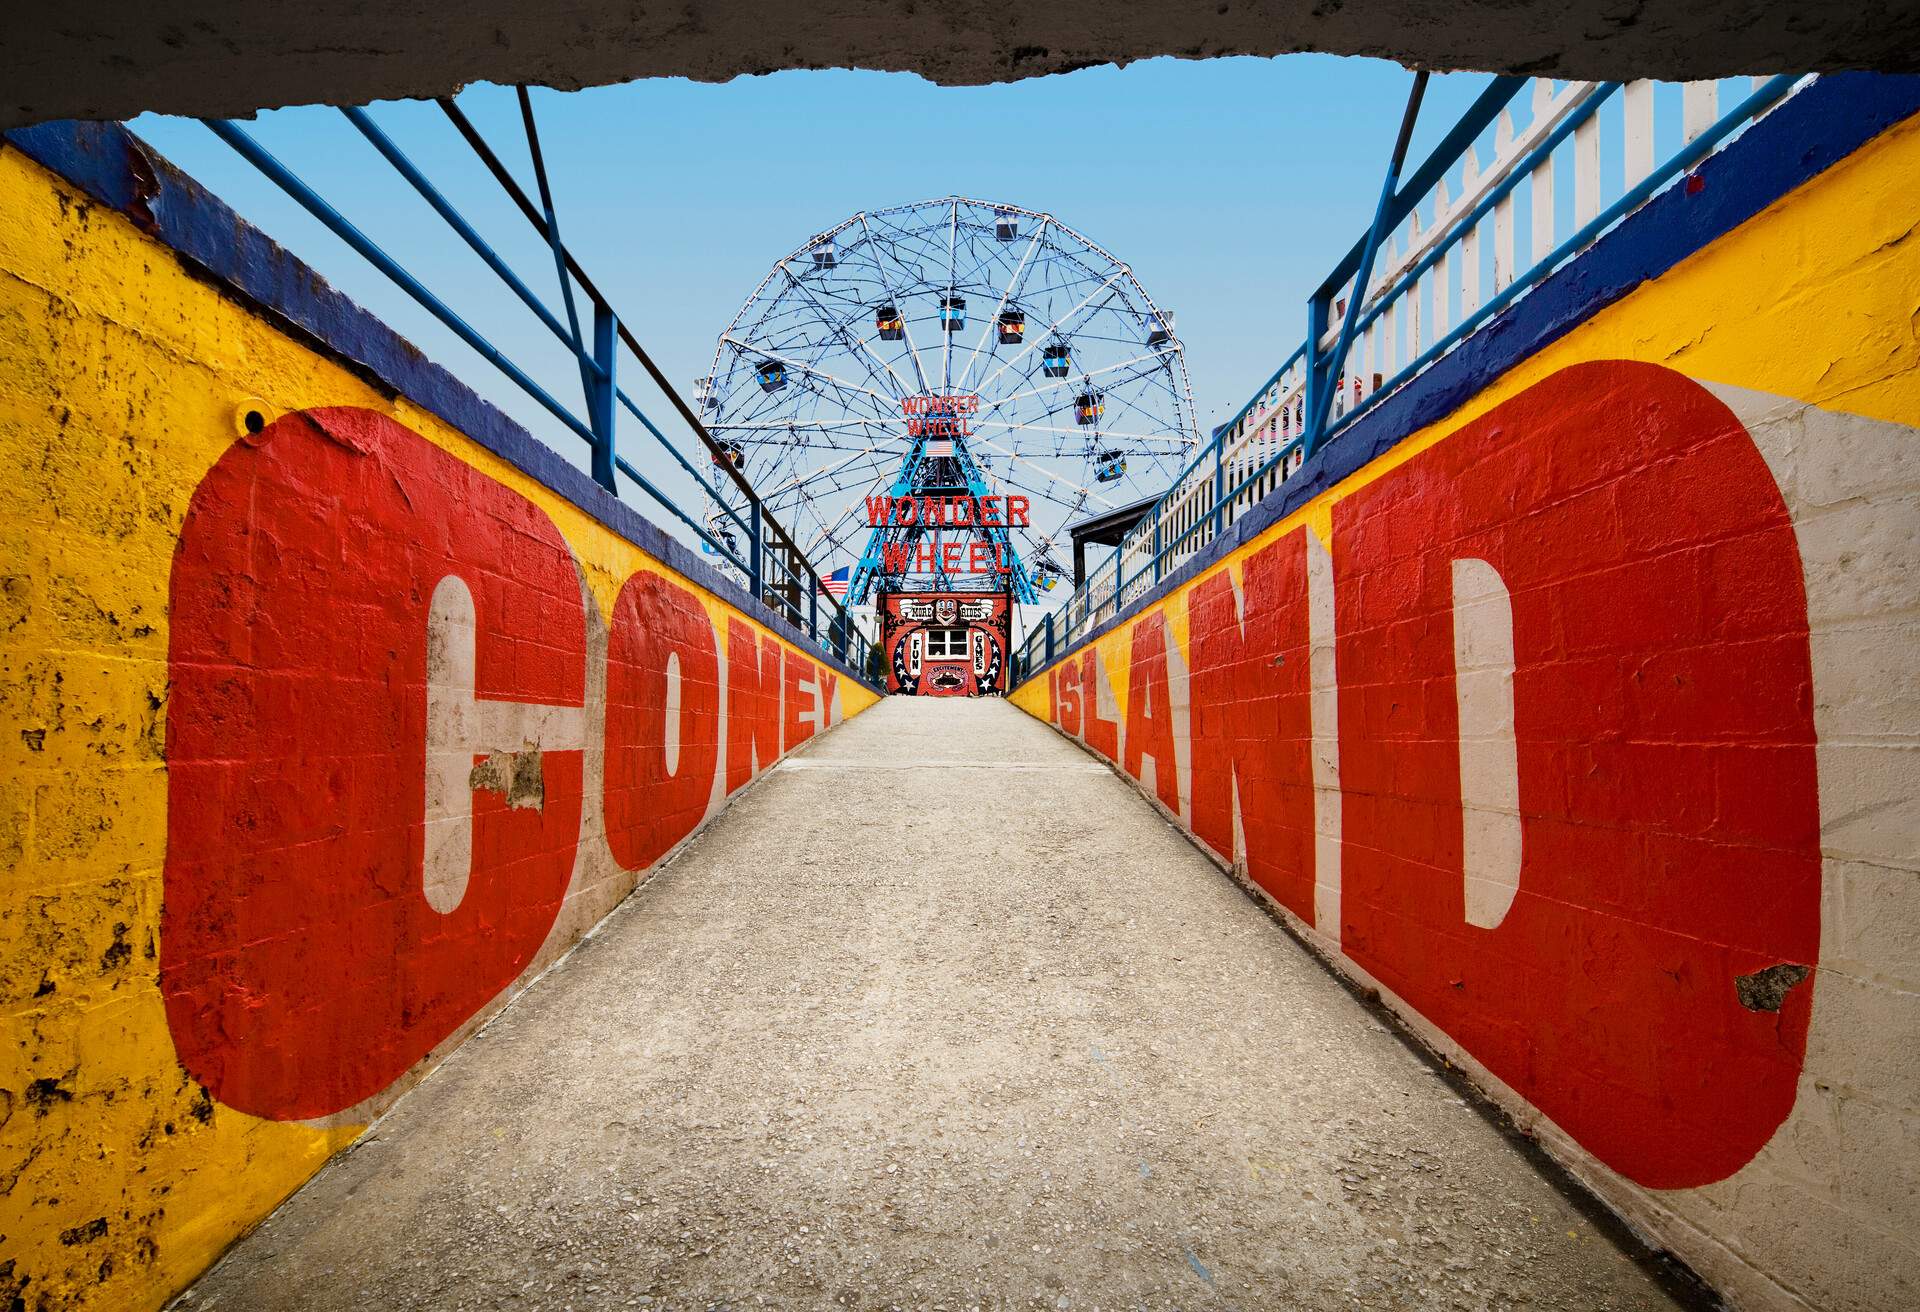 A concrete walkway with the words CONEY ISLAND painted on the inner sides of the brick walls and the Wonder Wheel in the distance.